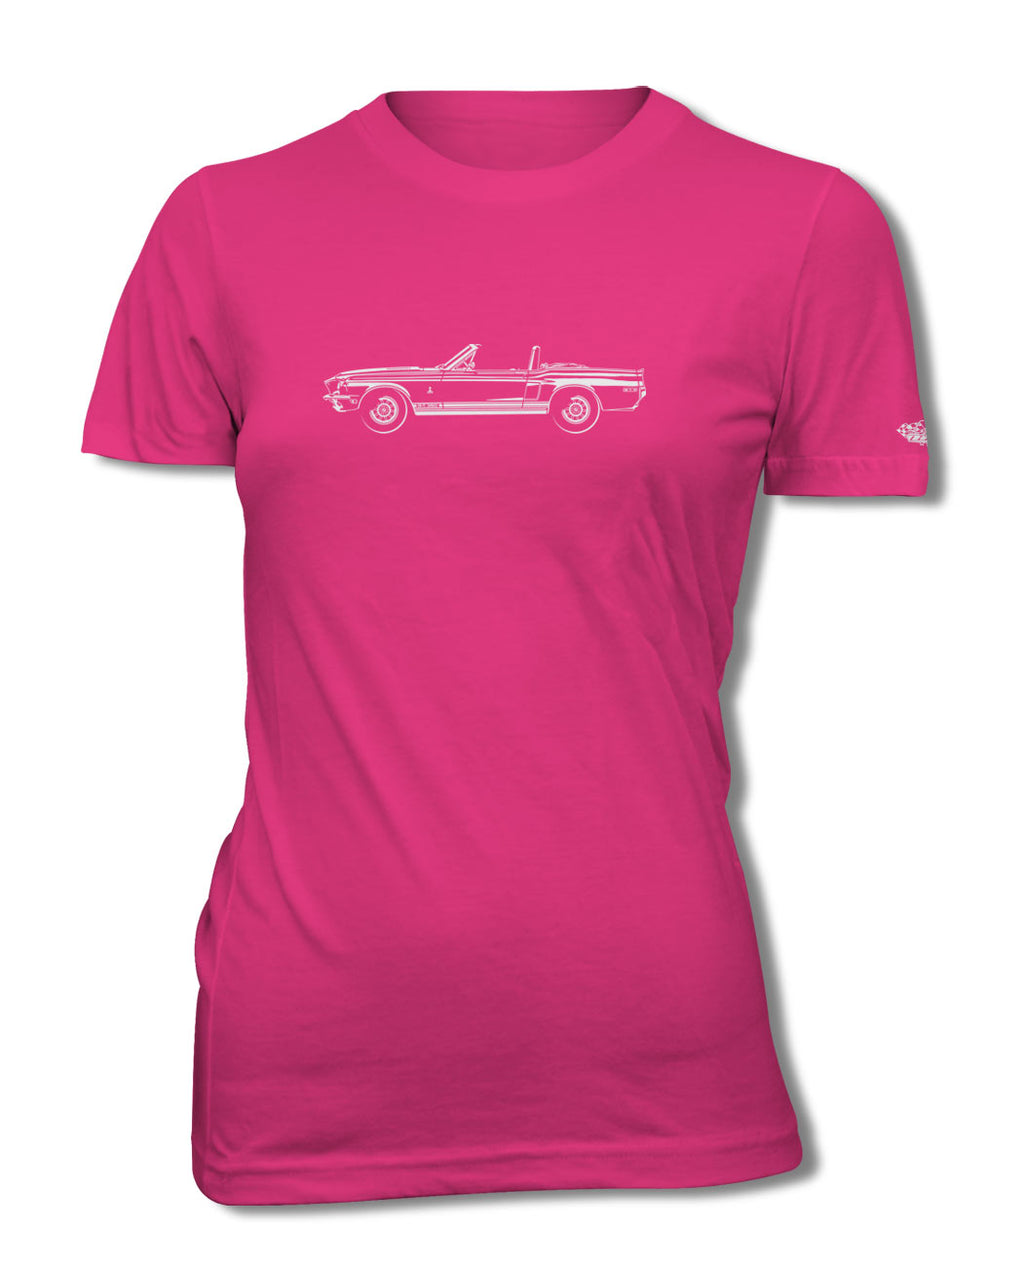 1968 Ford Mustang Shelby GT350 Convertible T-Shirt - Women - Side View